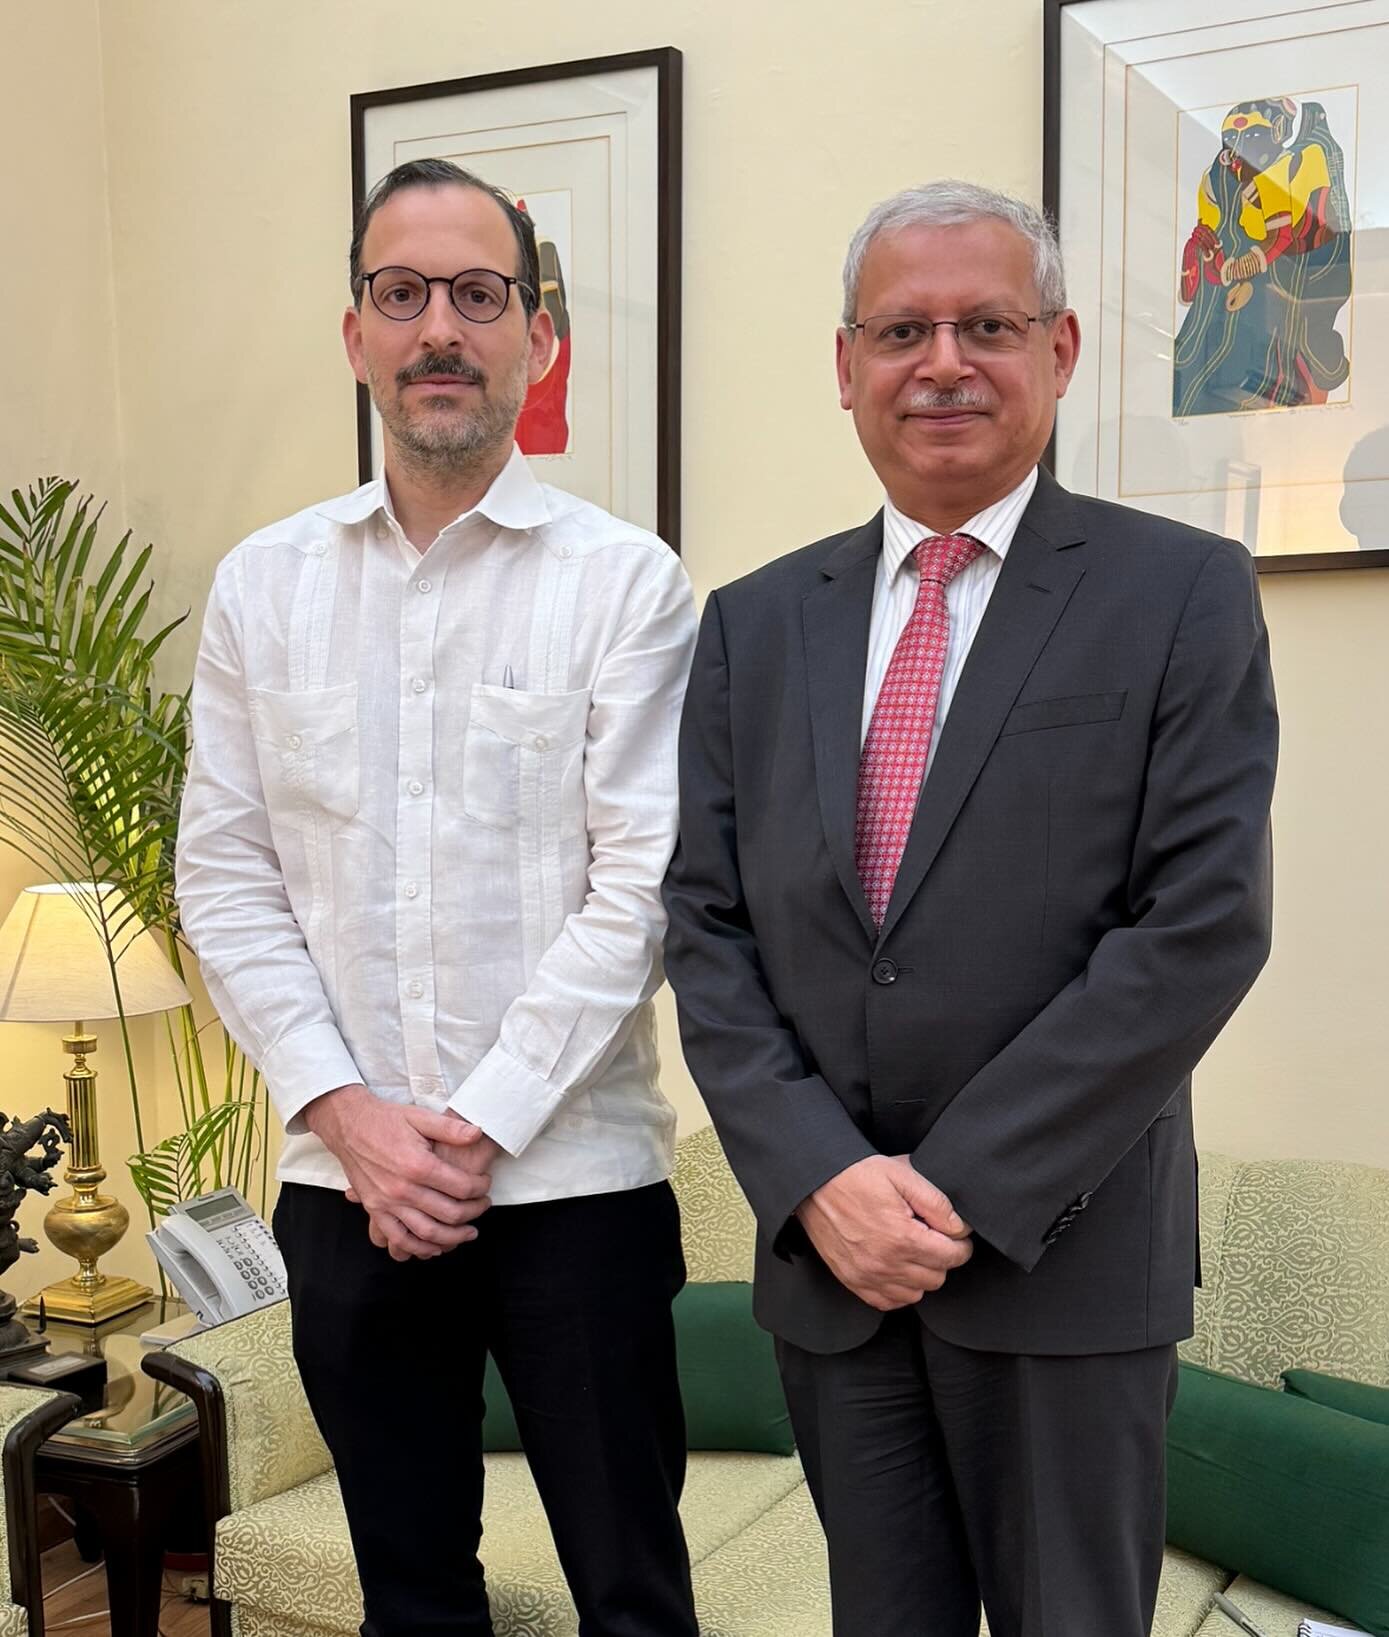 Ambassador David Puig paid a courtesy visit to the new Secretary East, H.E. Jaideep Mazumdar, at the Ministry of Foreign Affairs. The meeting was the occasion to review the wide variety of engagements of the bilateral relation between India and The D